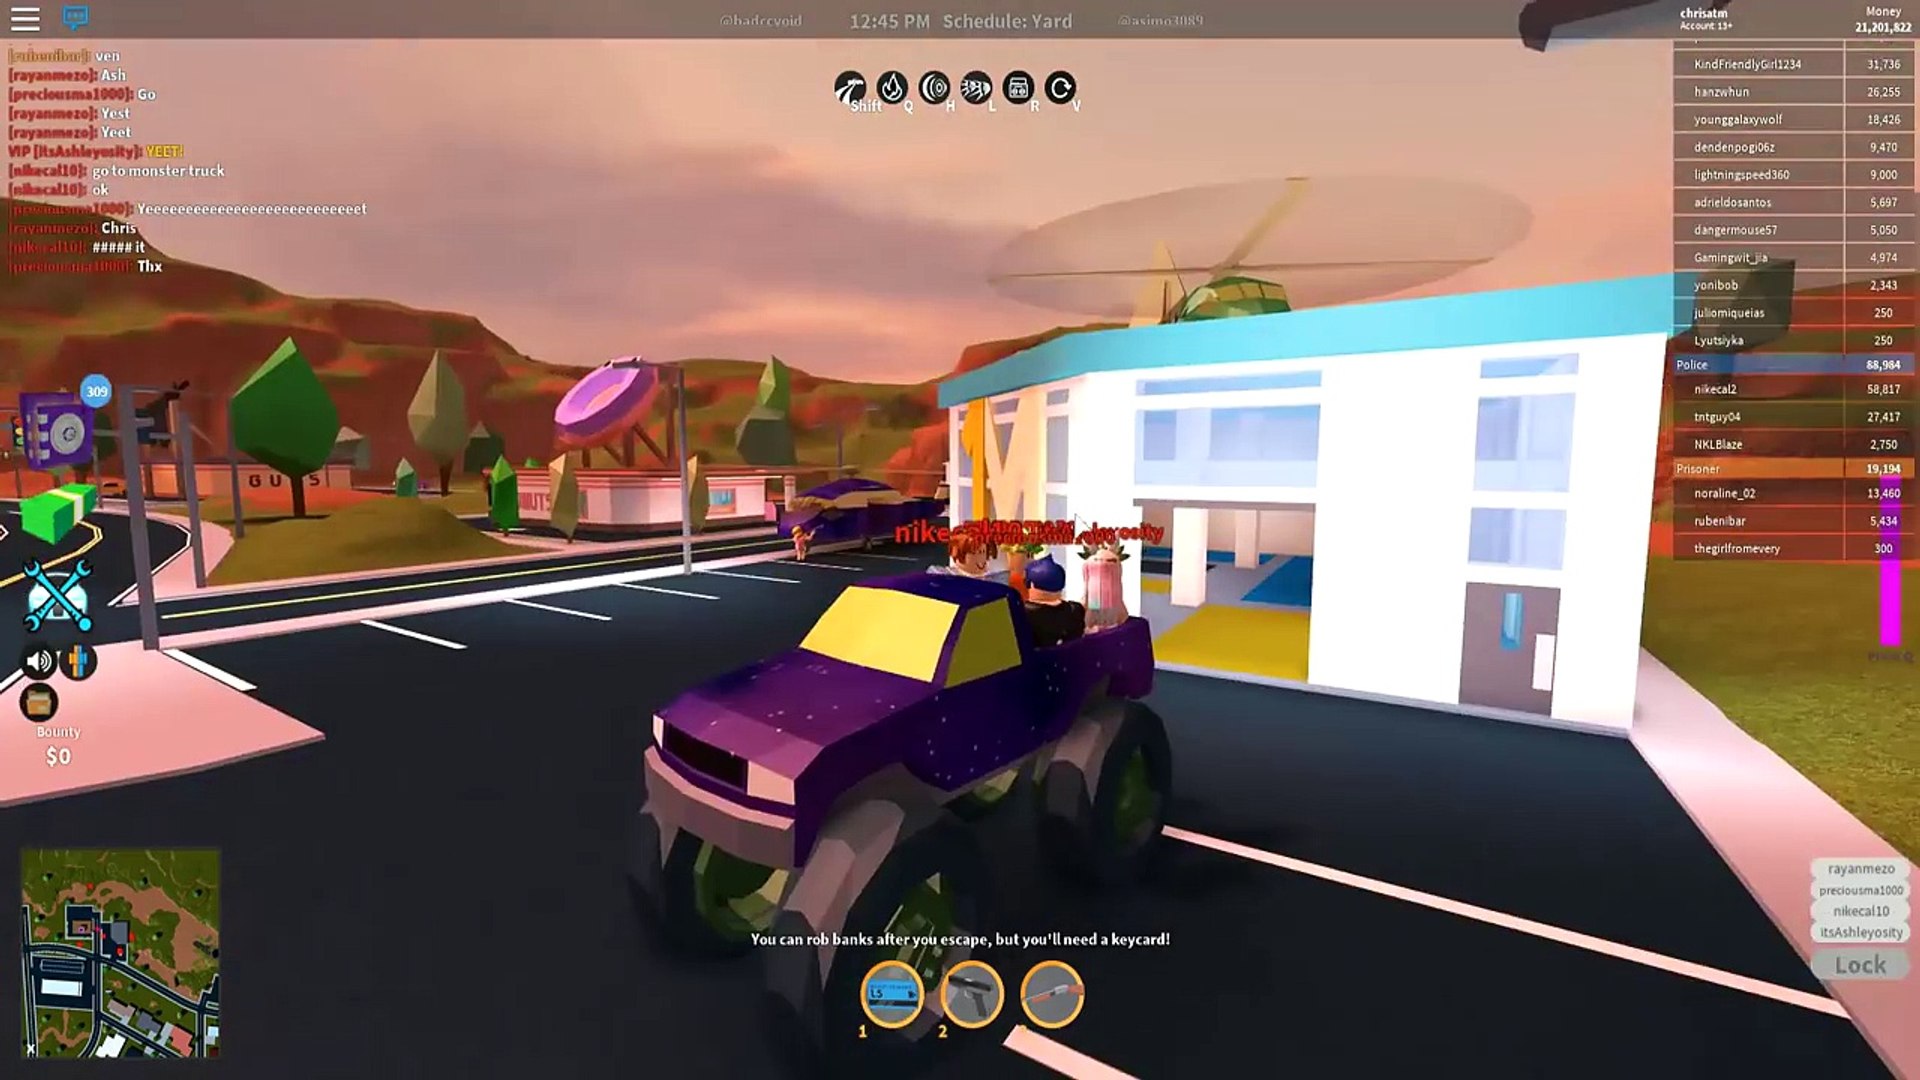 Roblox Jailbreak 99 New Missiles Update For Military Helicopter